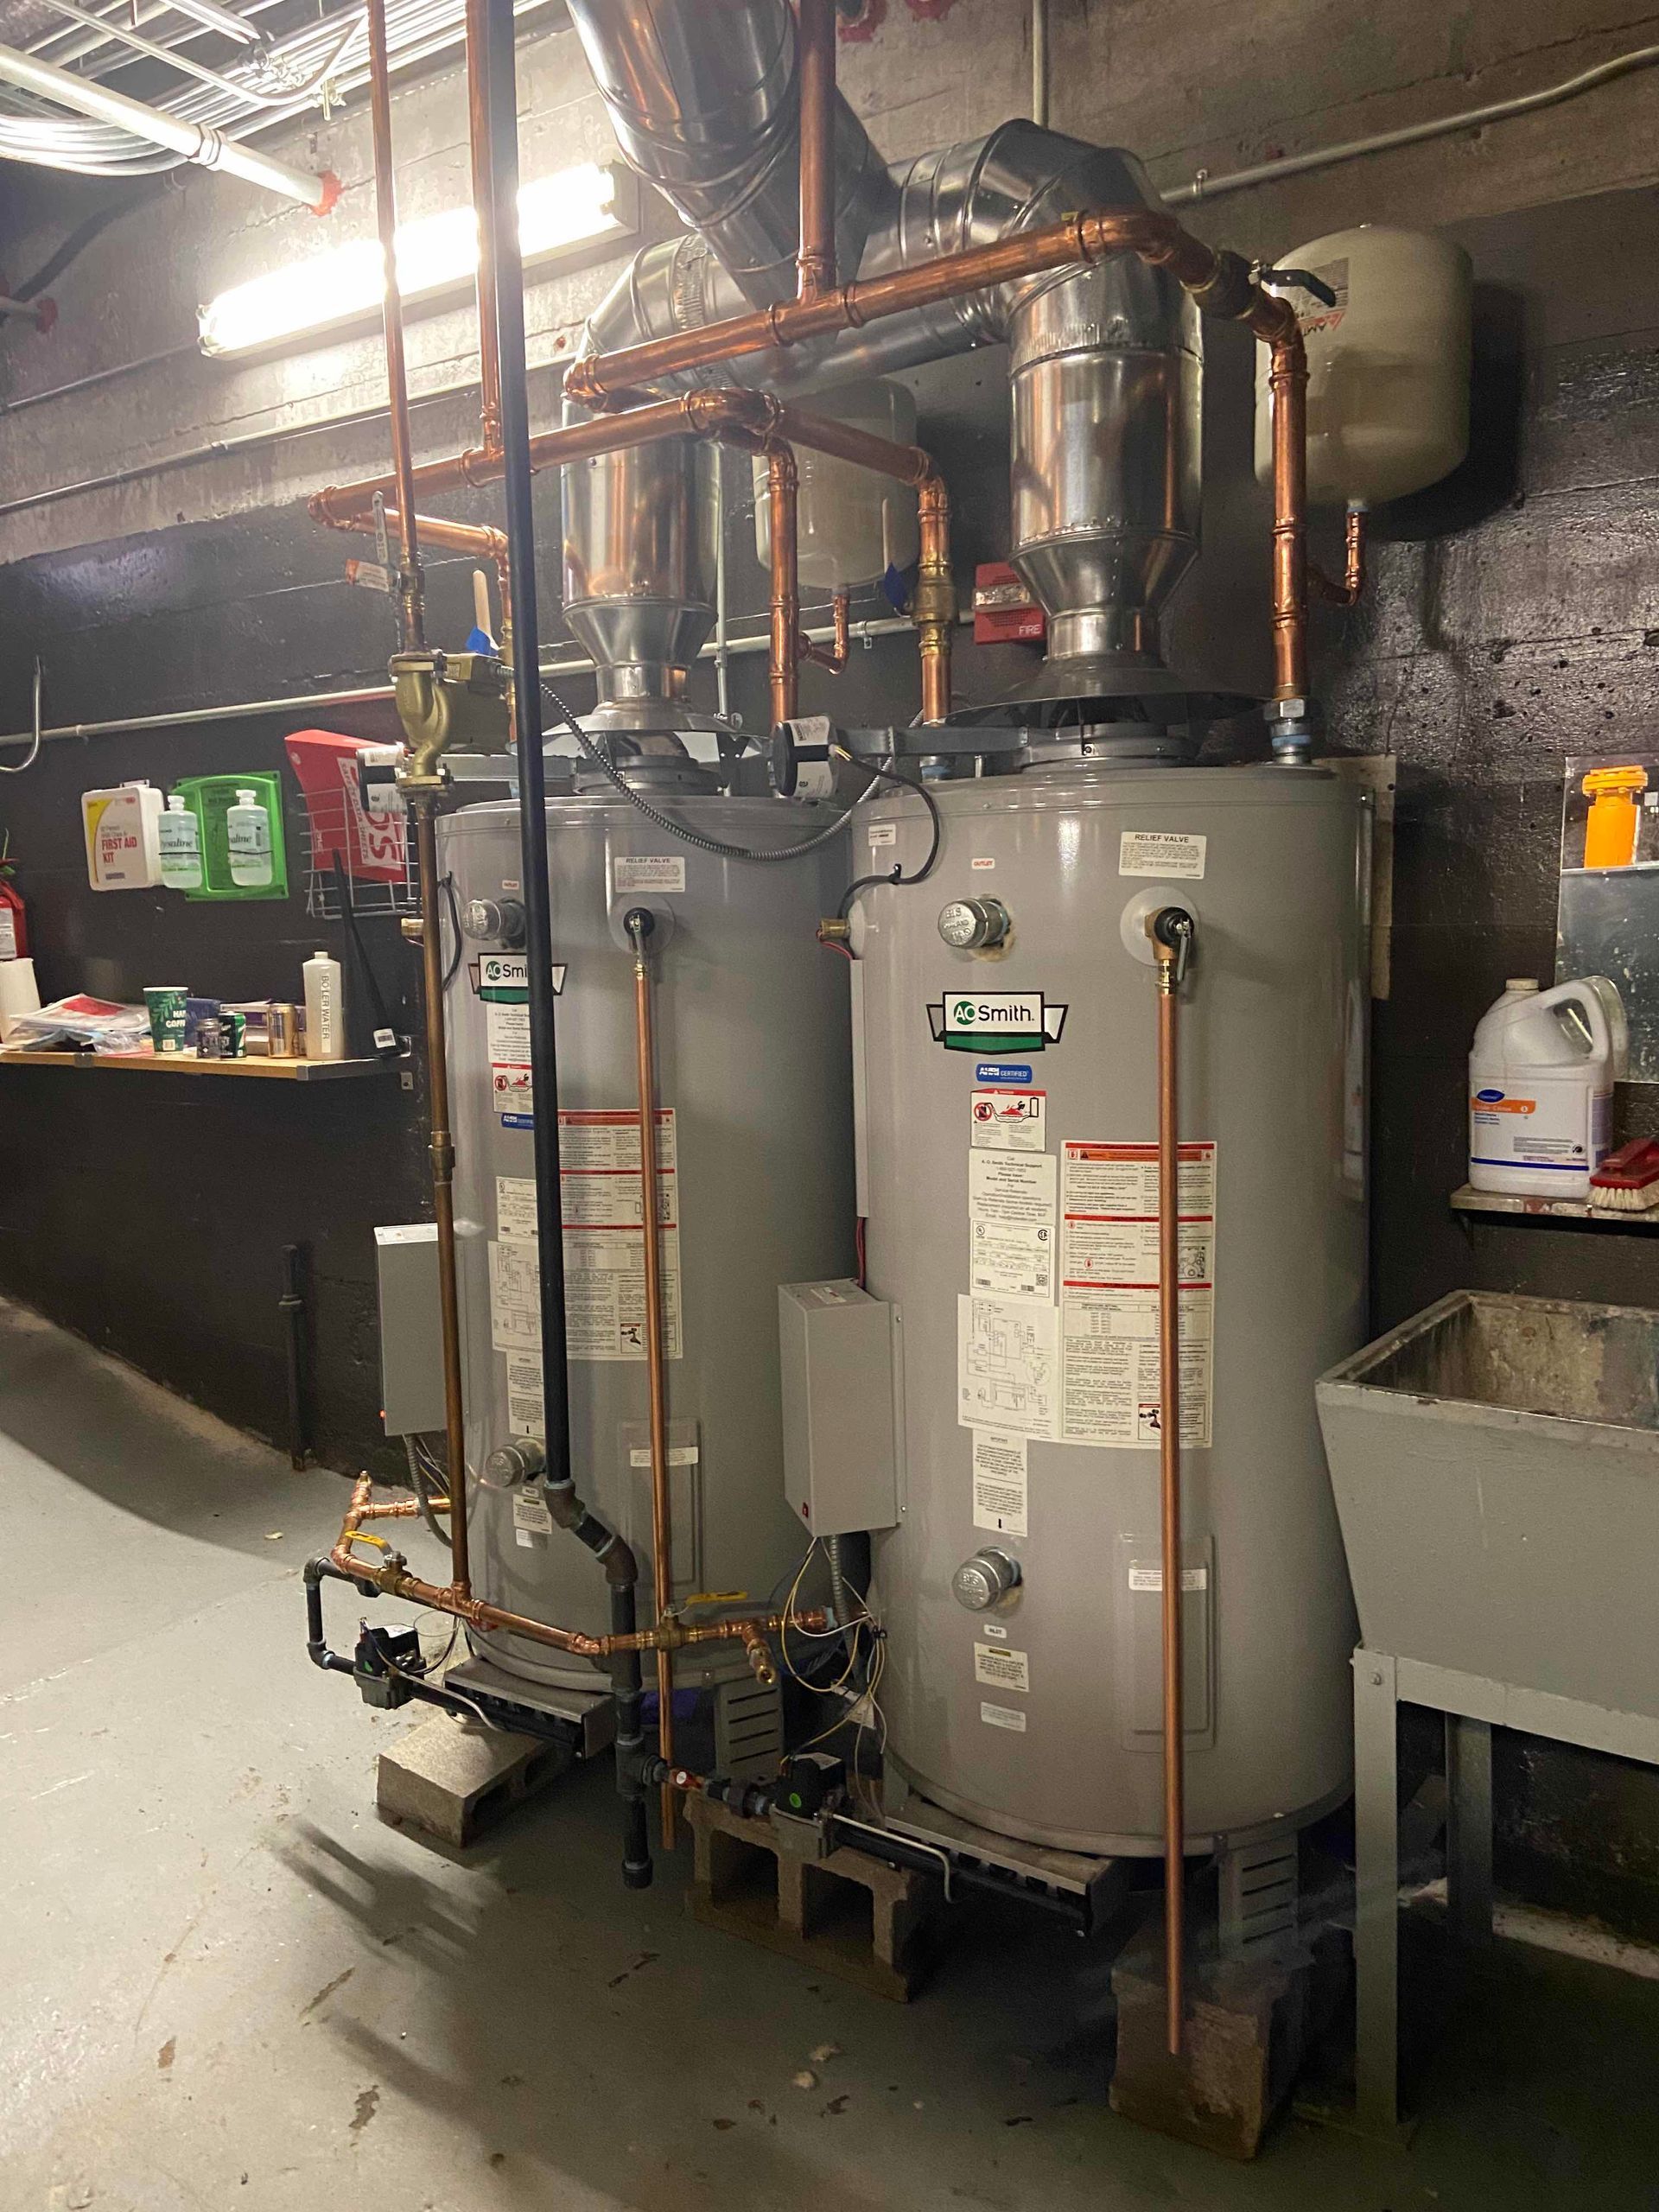 Commercial Water Heaters Installed on Cylinder Blocks